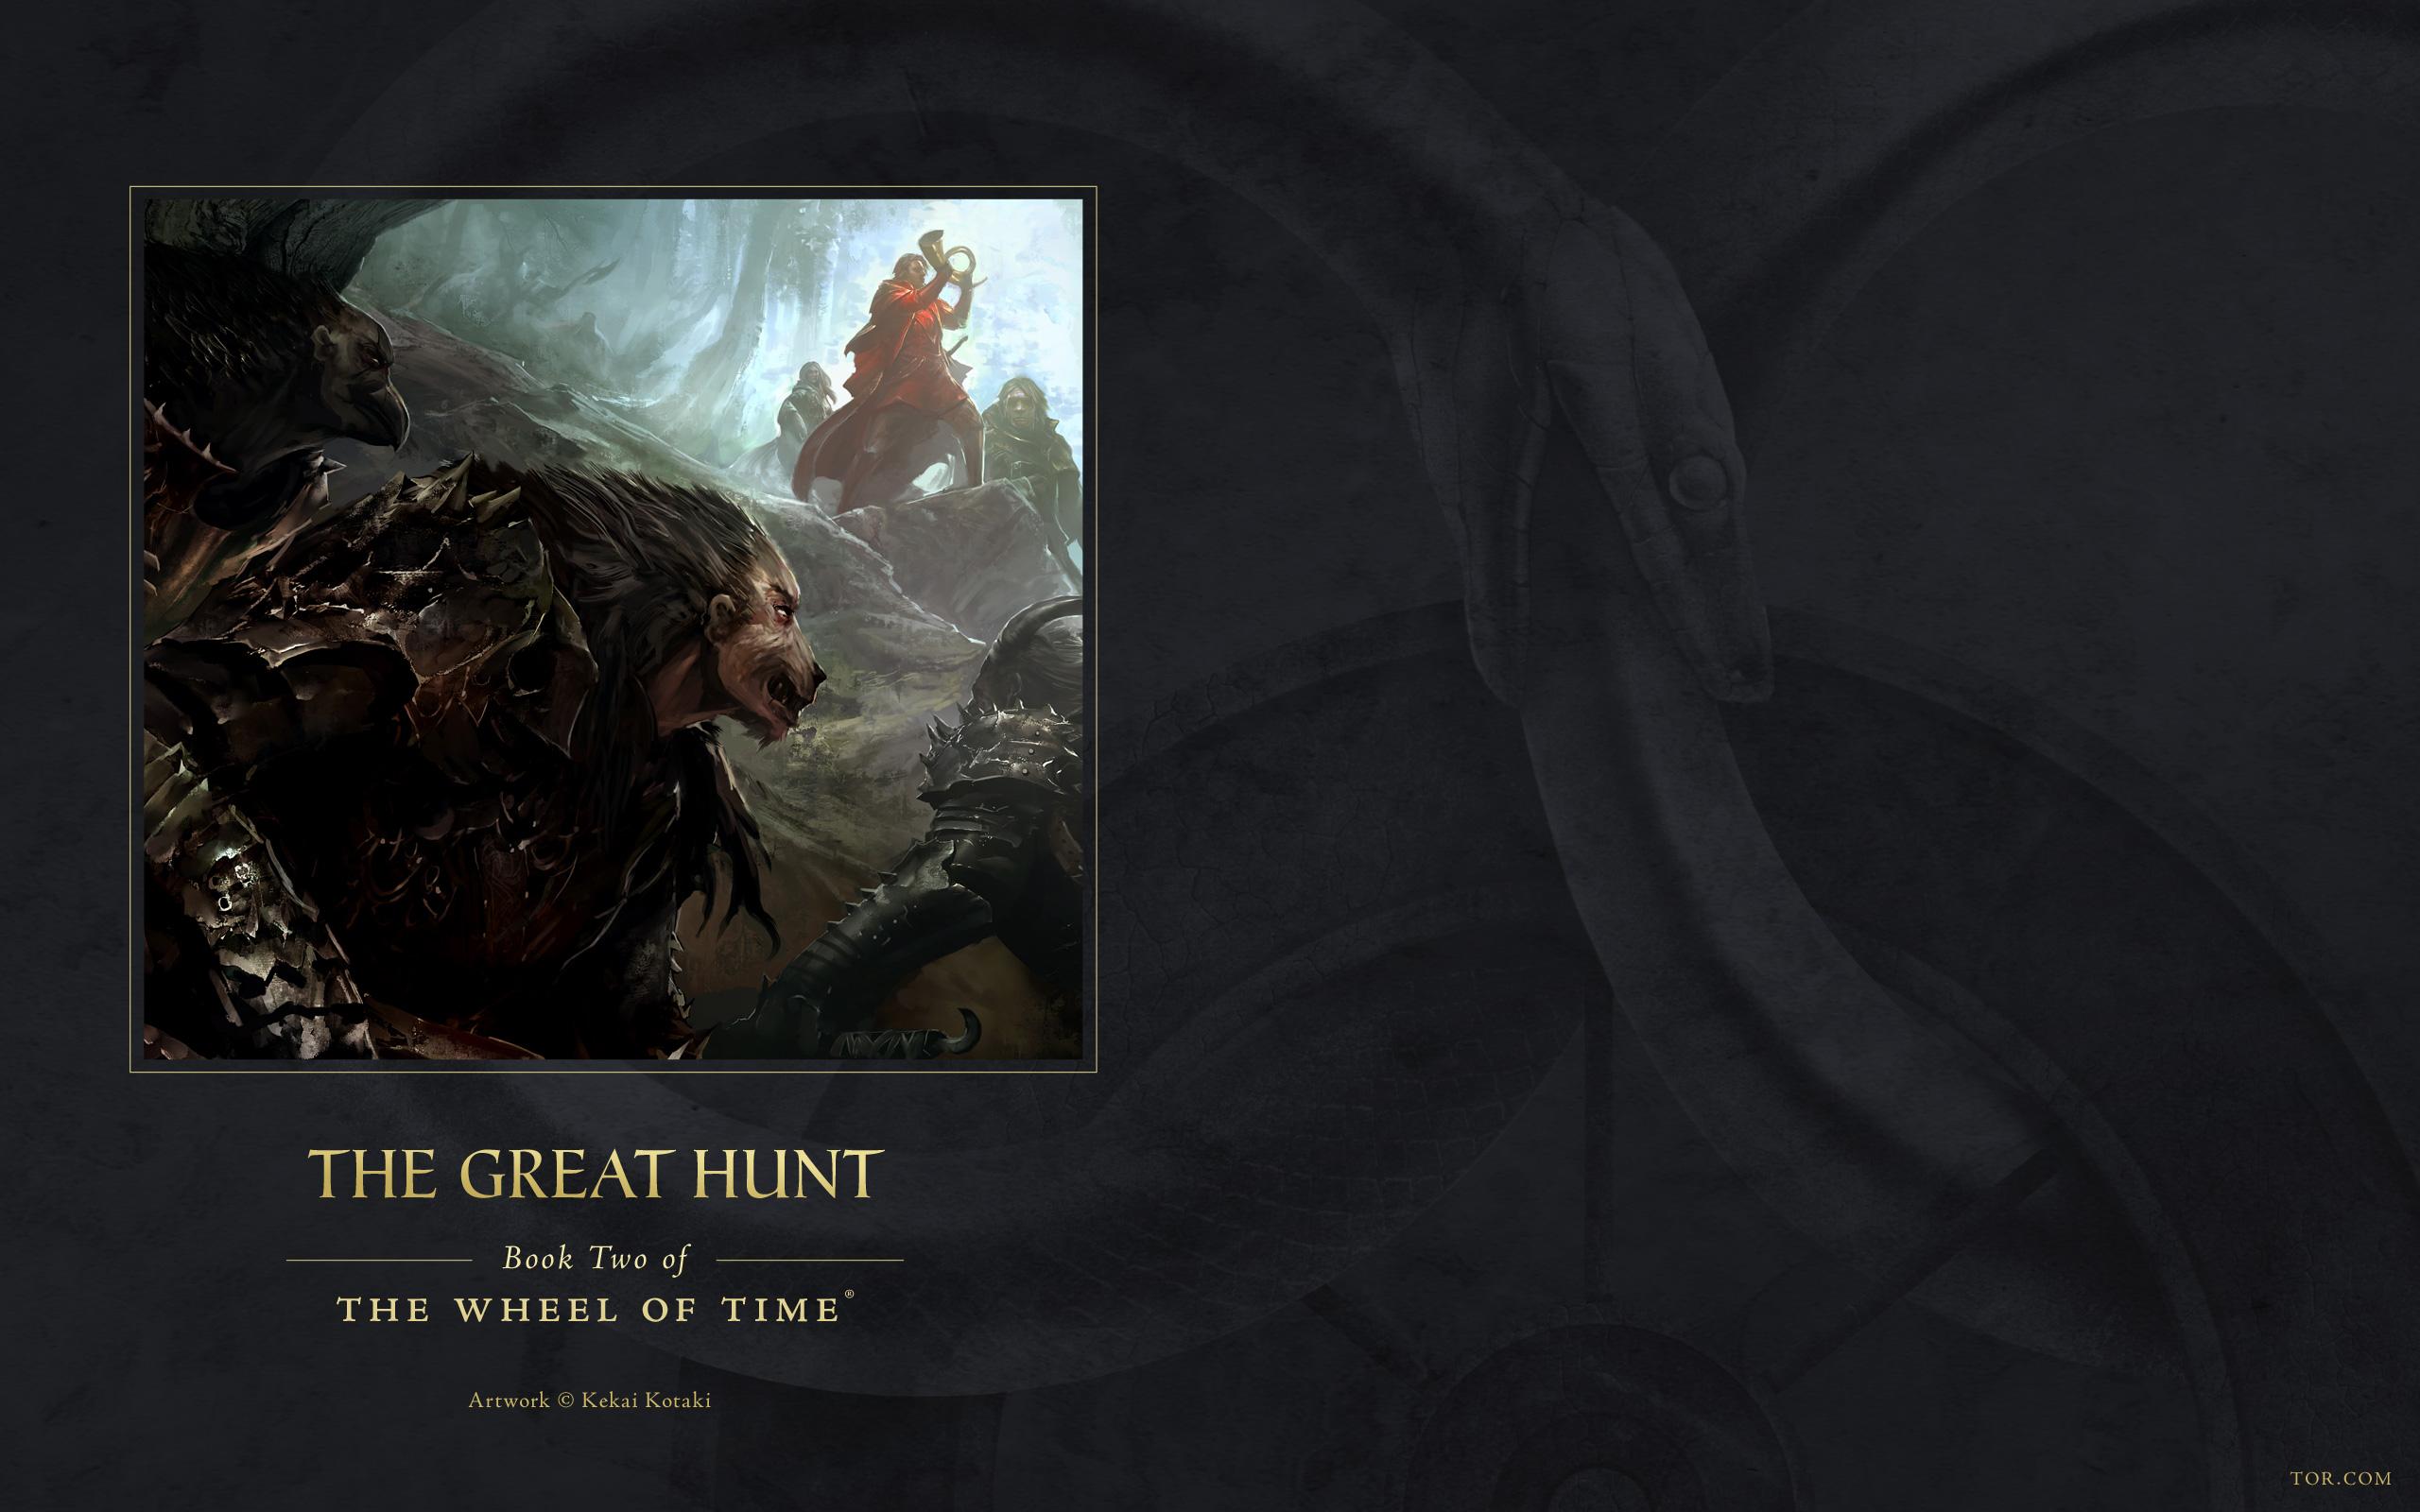 Download Free Wallpaper from The Great Hunt Ebook